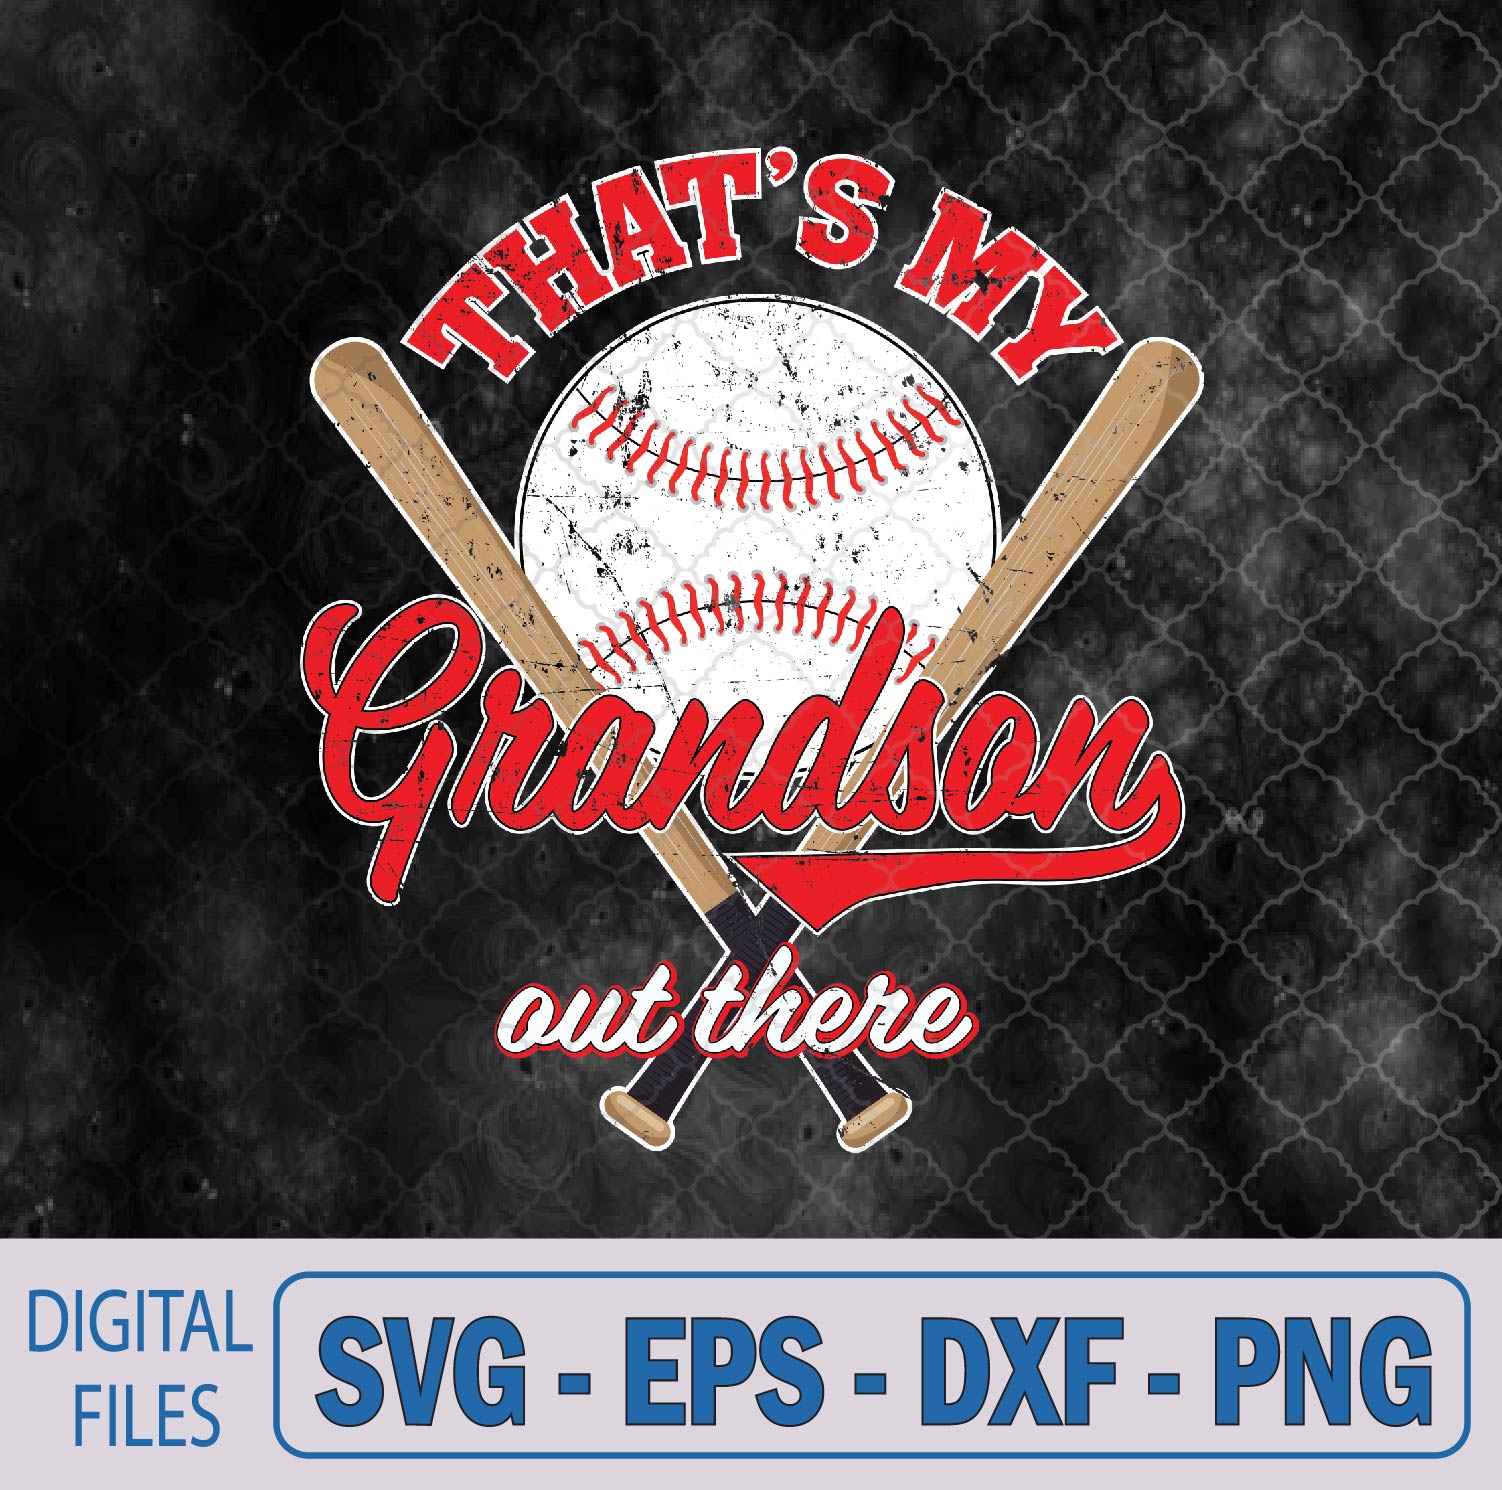 WTMNEW9file 09 250 That's My Grandson Out There proud grandma baseball granny Svg, Png, Digital Download